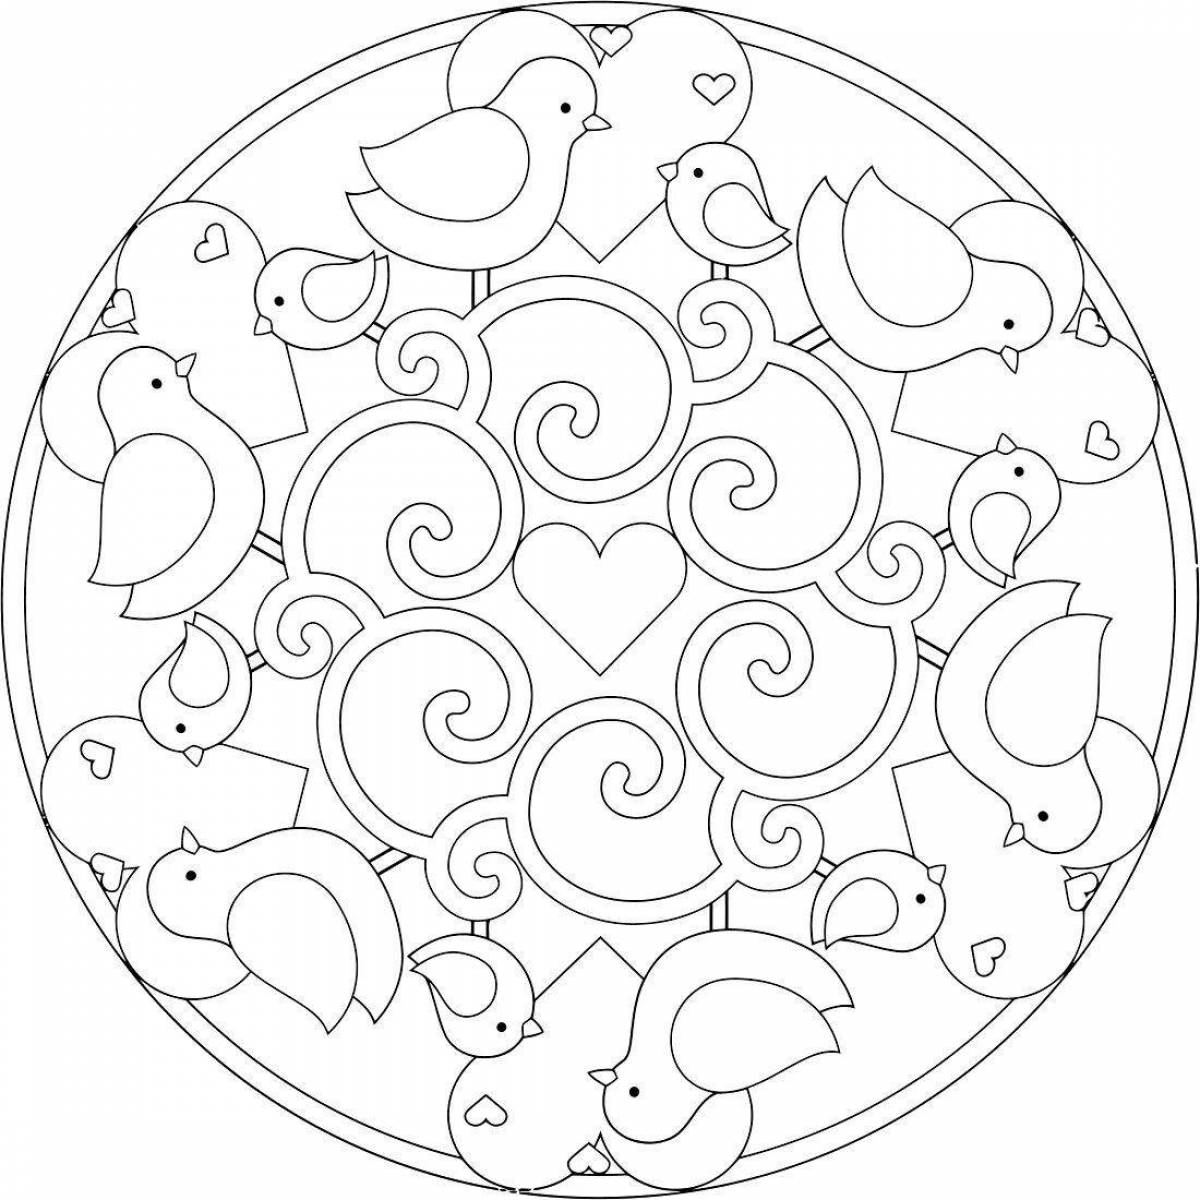 Playful anti-stress round coloring book